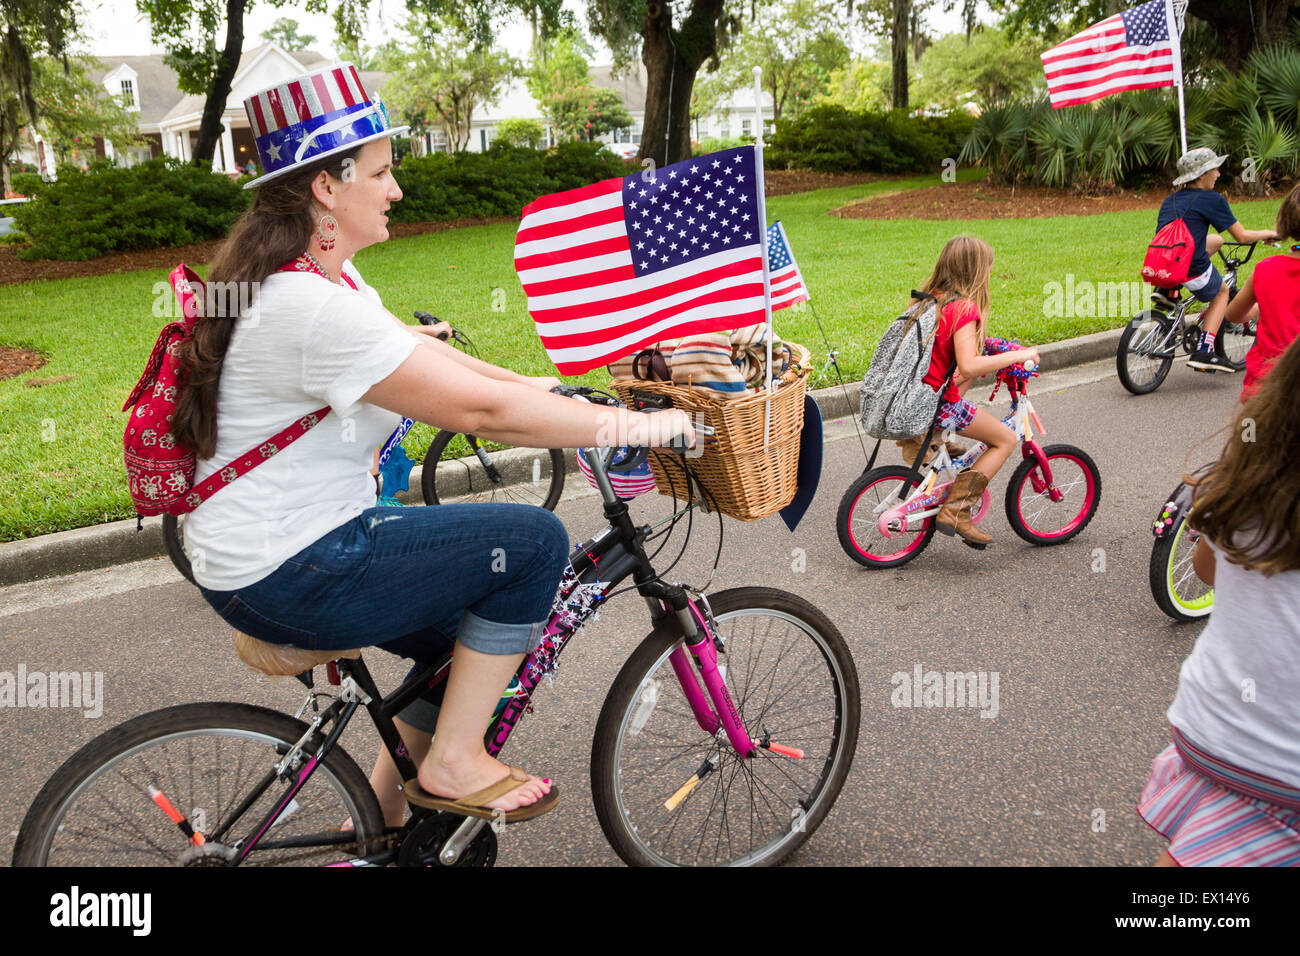 A family rides bicycles decorated with bunting and American flags during the Daniel Island Independence Day parade July 3, 2015 in Charleston, South Carolina. Stock Photo